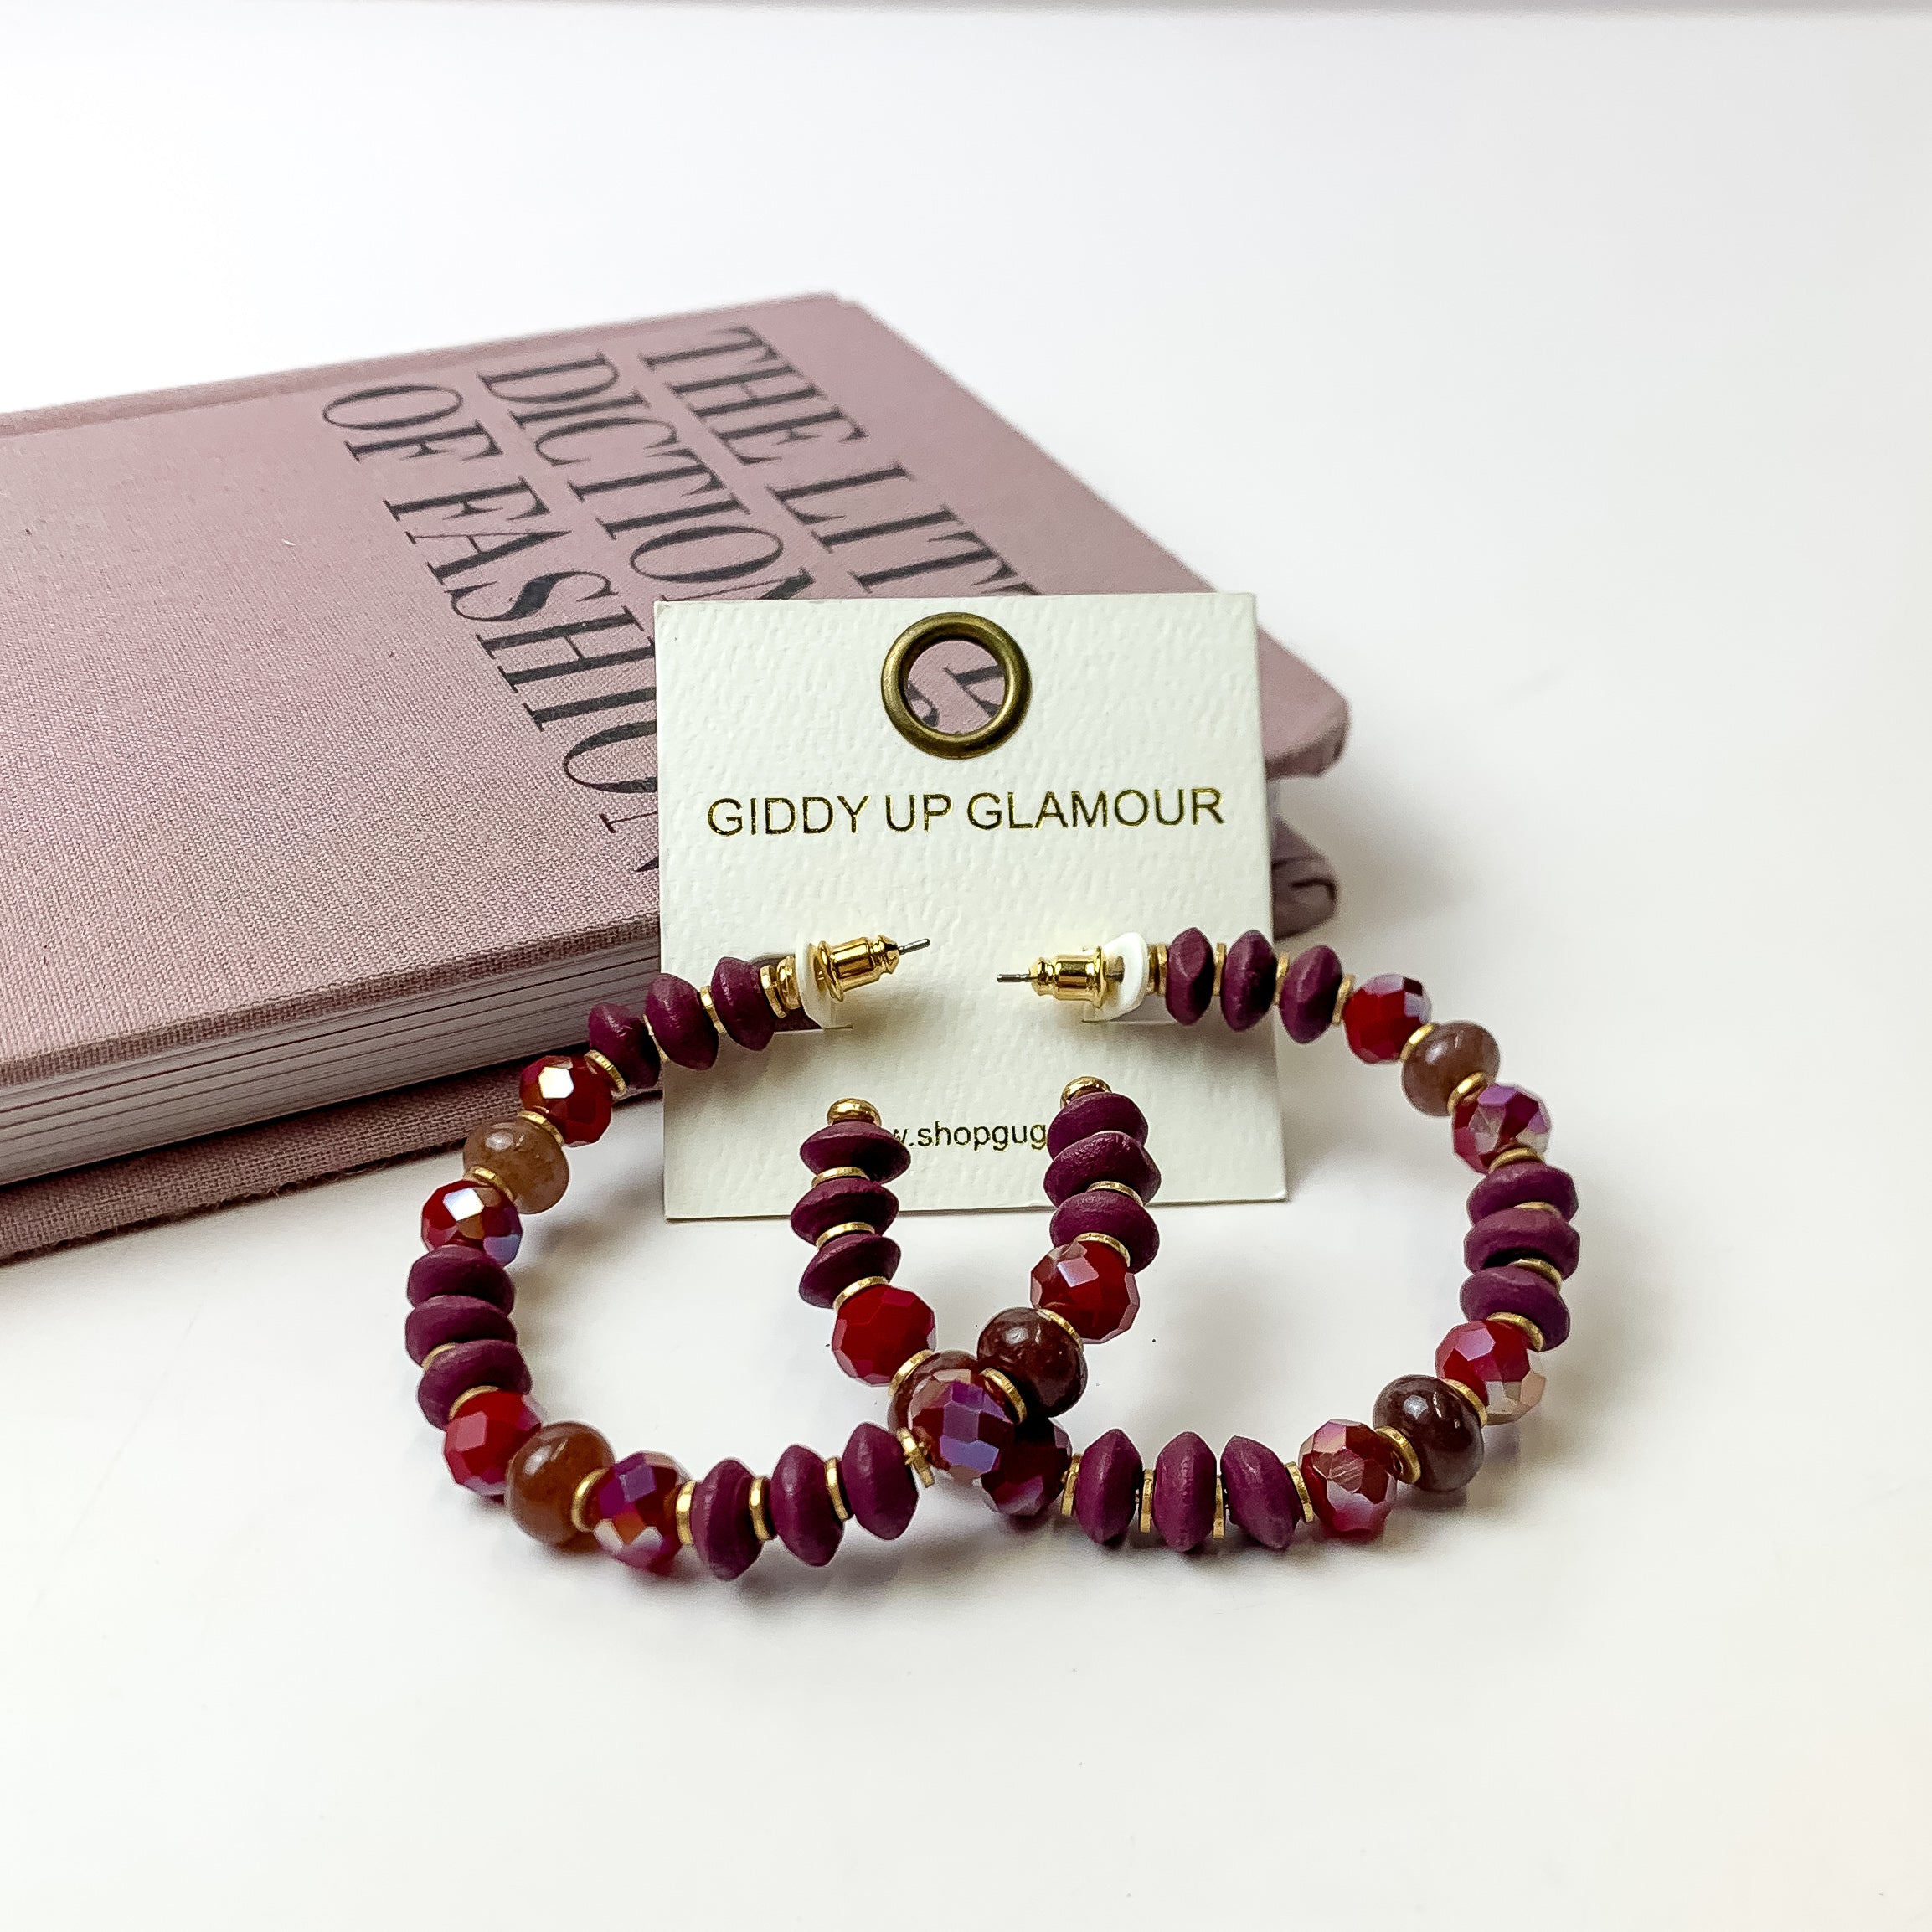 A pair of plum purple beaded hoop earrings on an ivory earring card. These earrings are pictured on a white background with a light purple book!